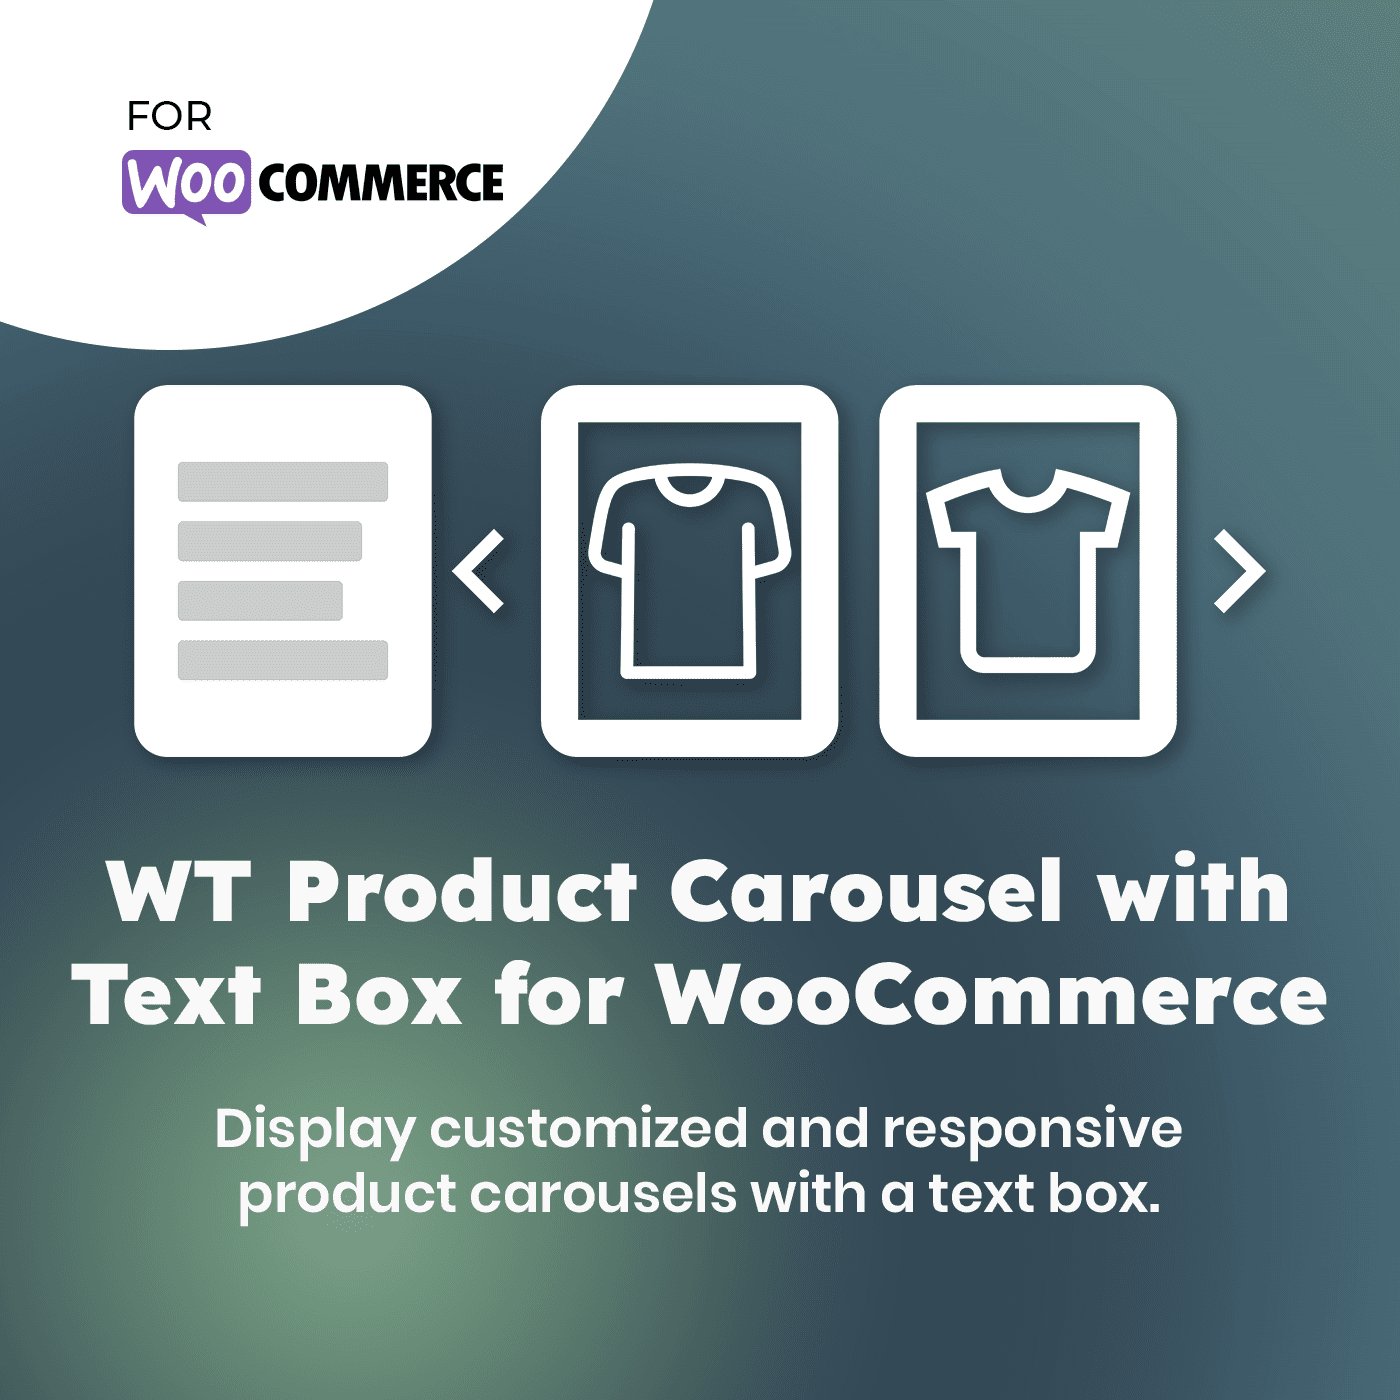 WT Product Carousel with Text Box for WooCommerce - WordPress Plugin for WooCommerce